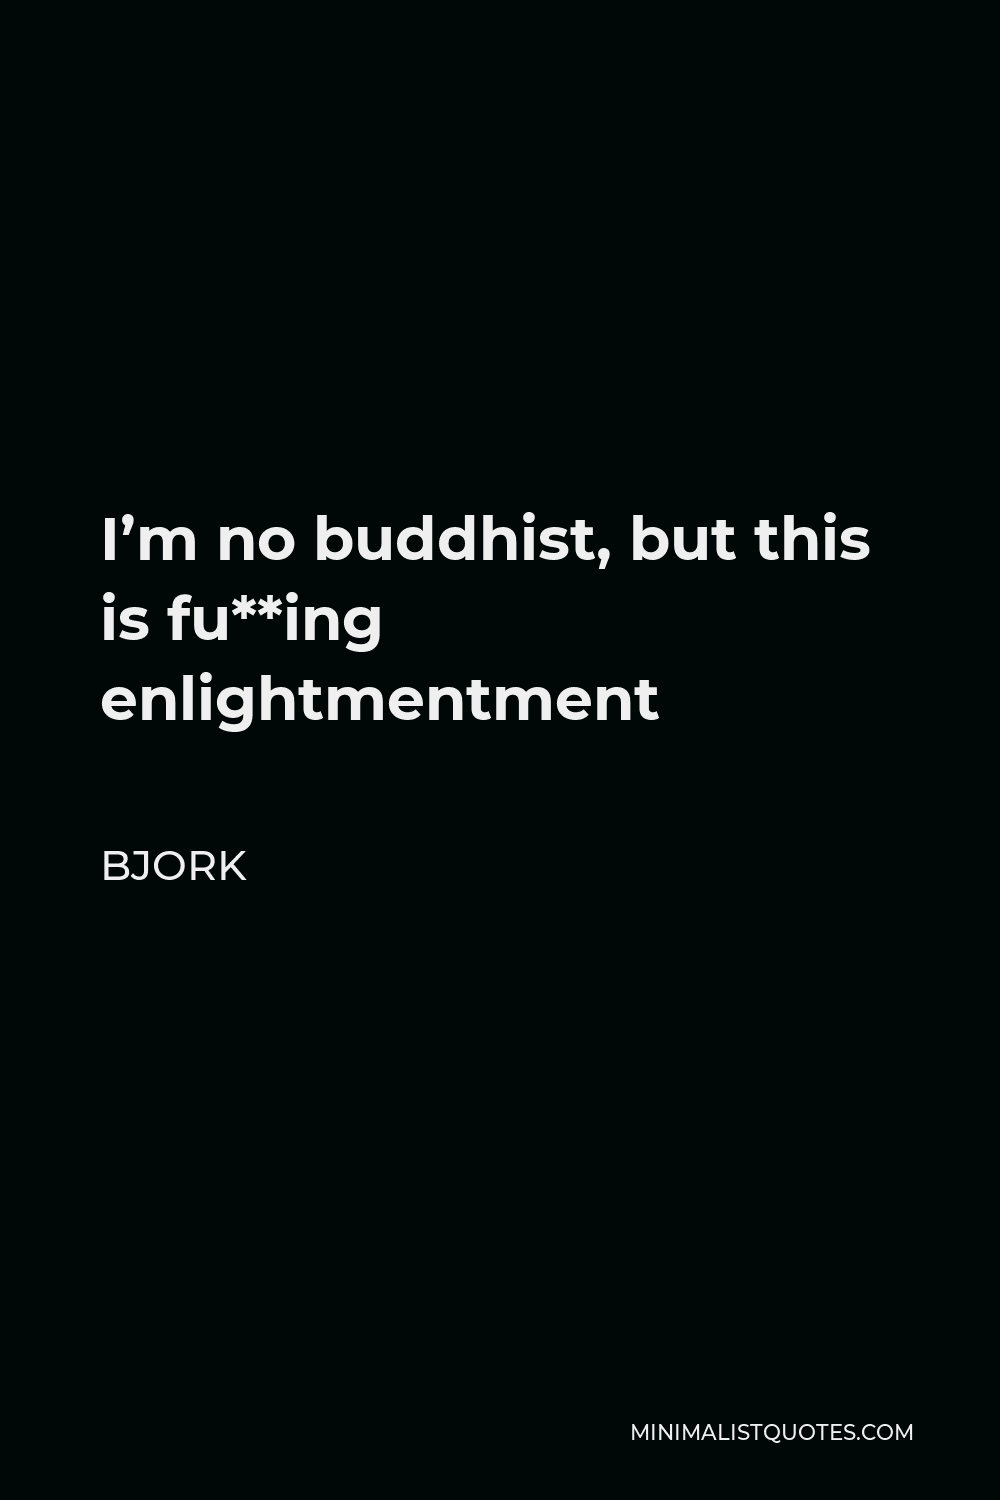 Bjork Quote - I’m no buddhist, but this is fu**ing enlightmentment